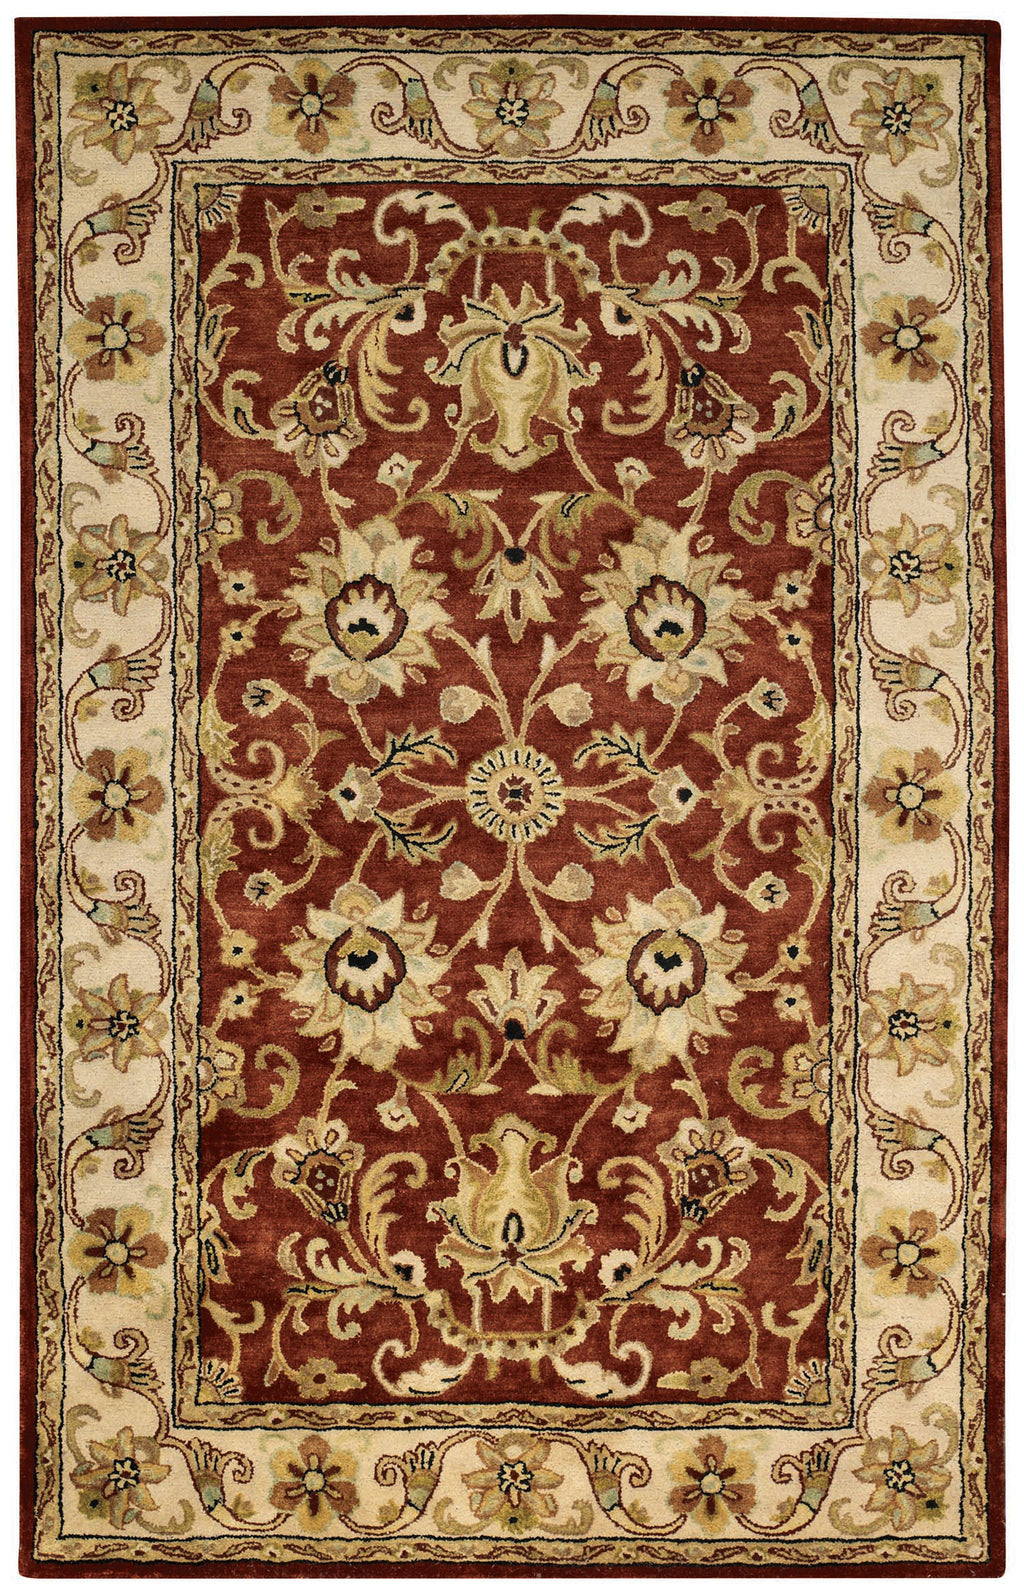 Capel Guilded 9205 Red 560 Area Rug main image